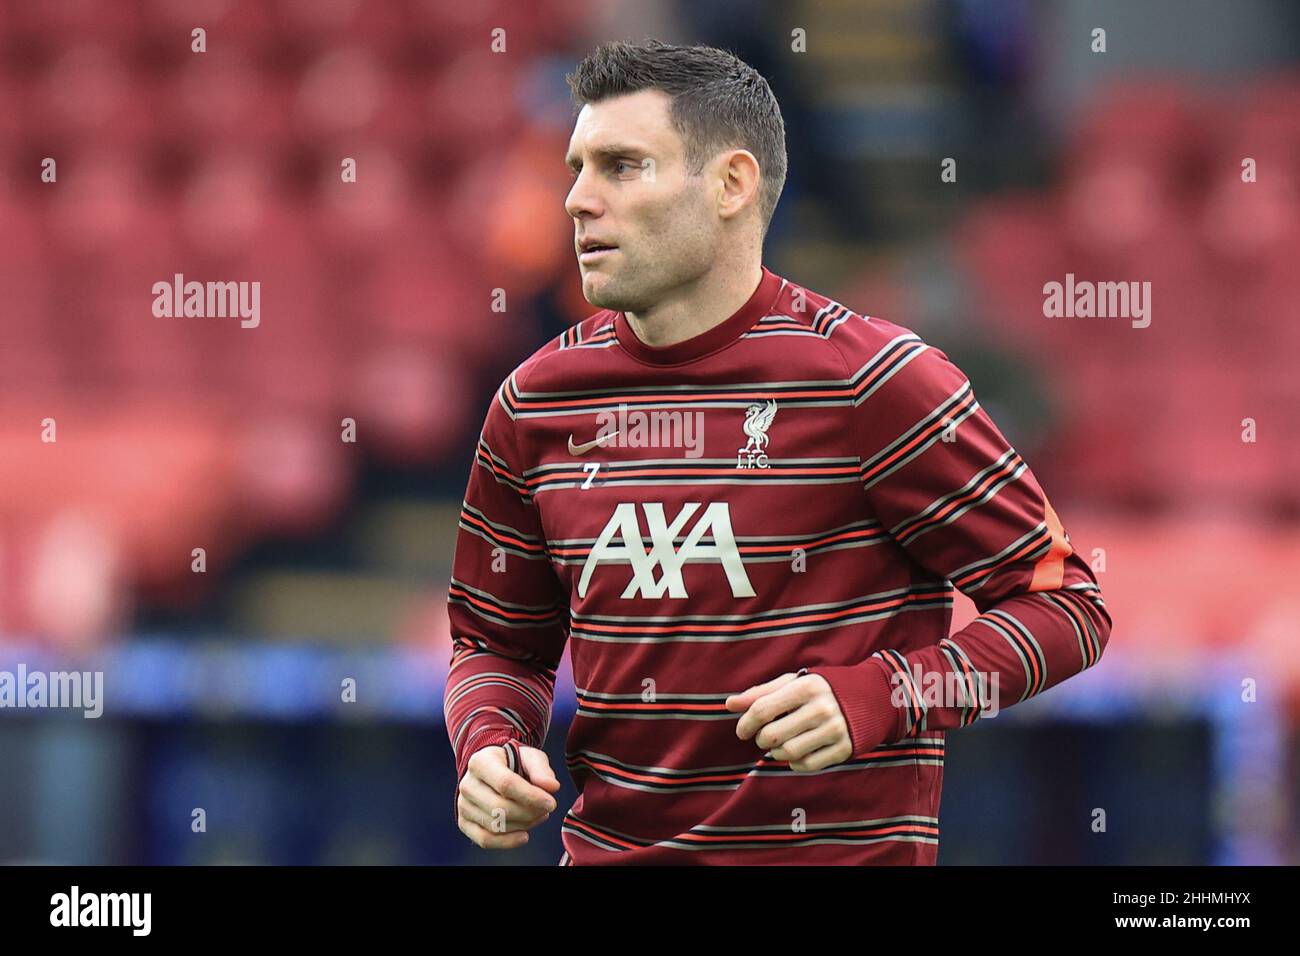 James Milner #7 of Liverpool during the pre-game warmup Stock Photo